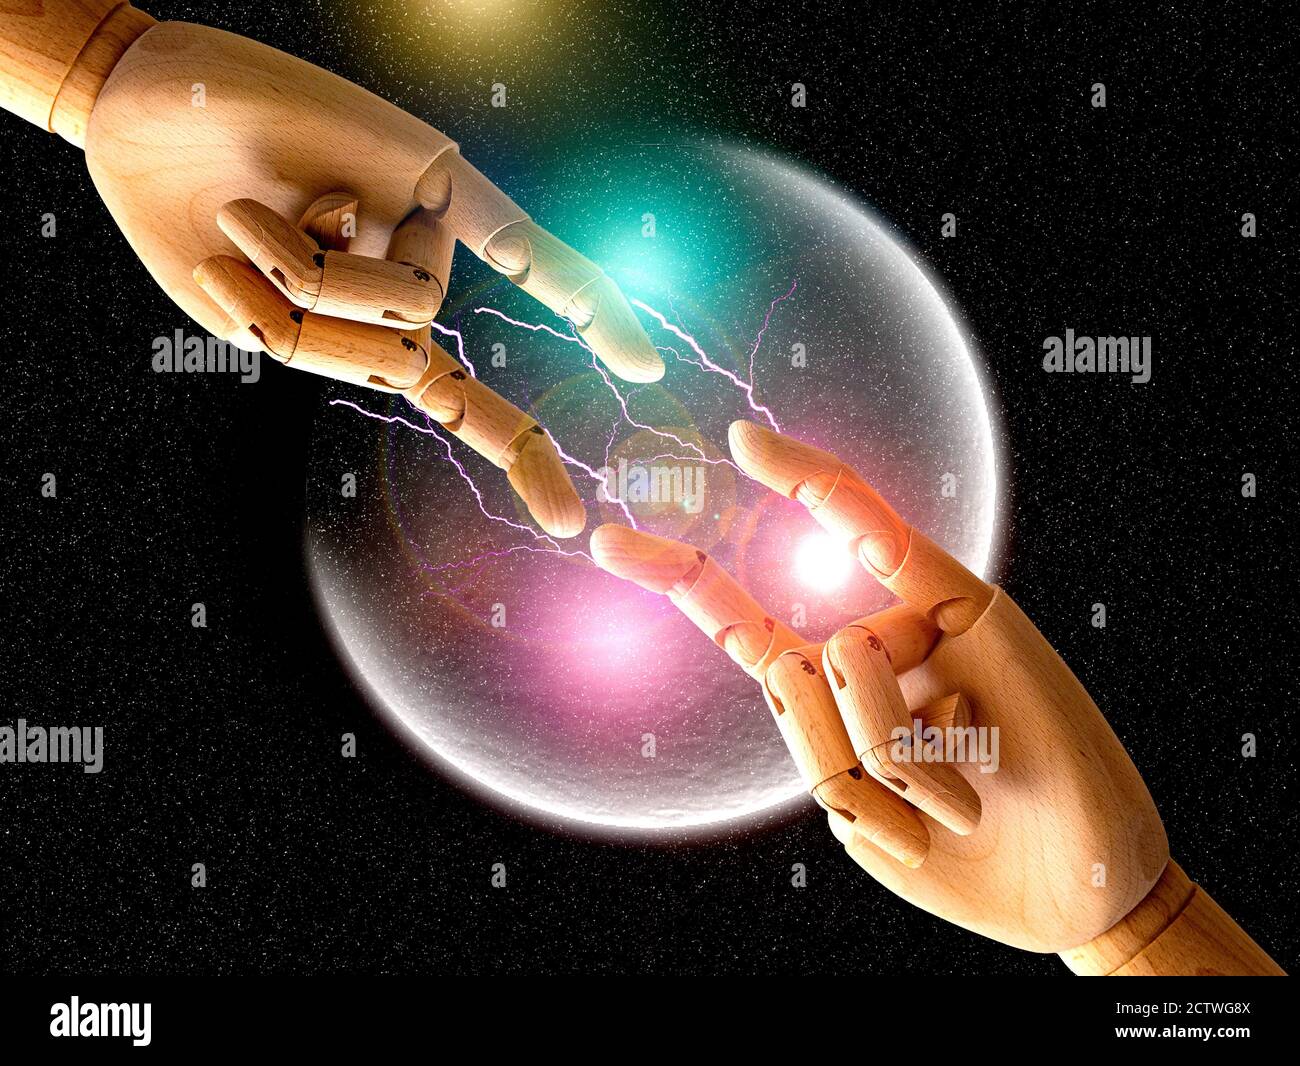 Two wooden hands battling in space Stock Photo